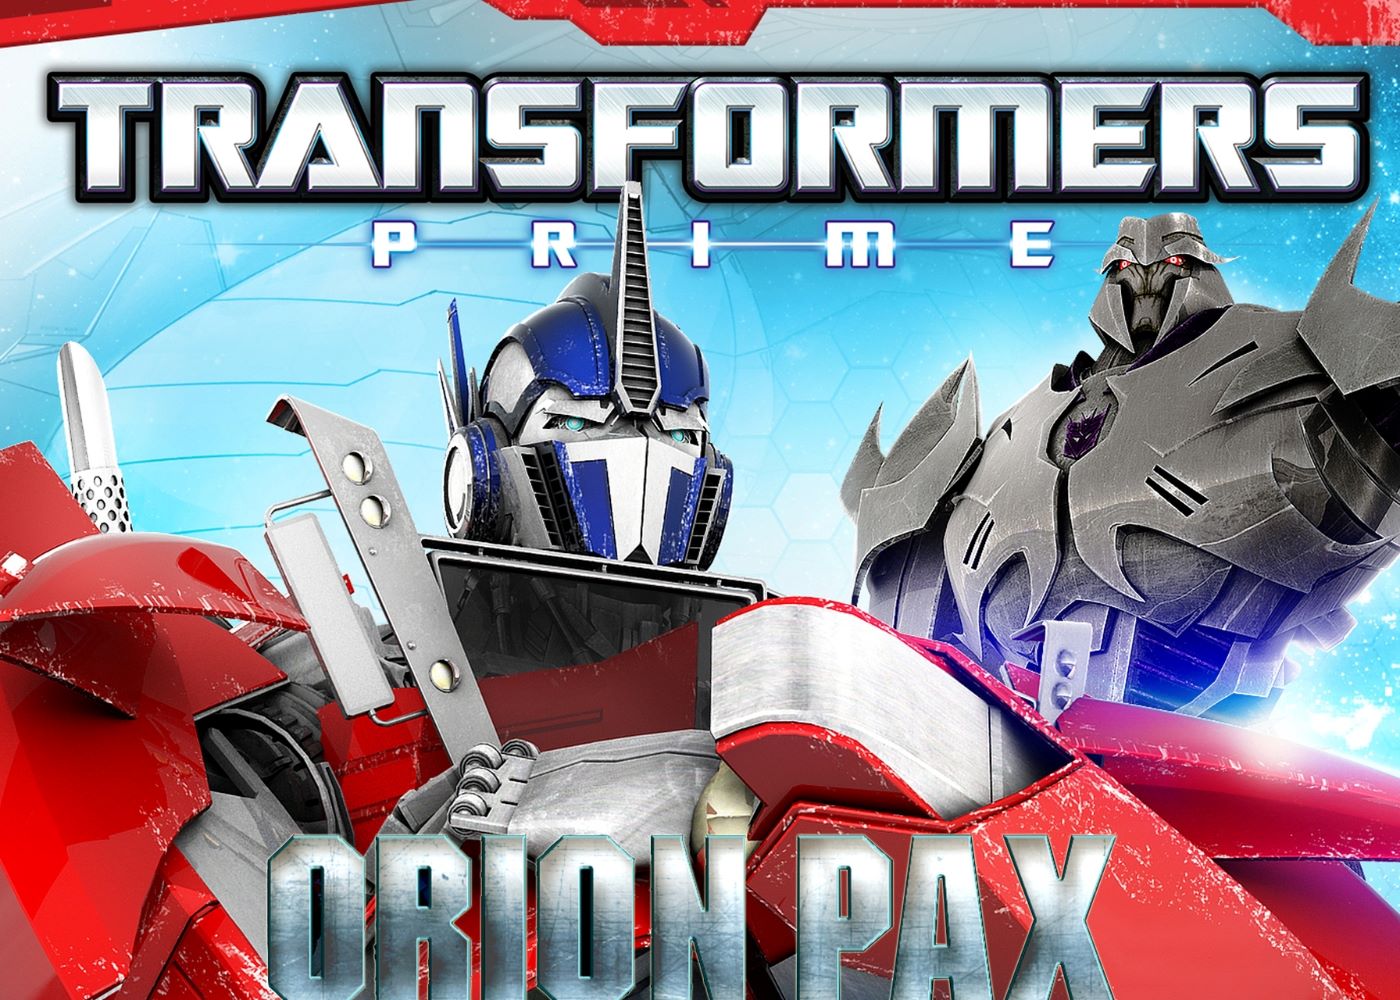 25-facts-about-orion-pax-transformers-prime